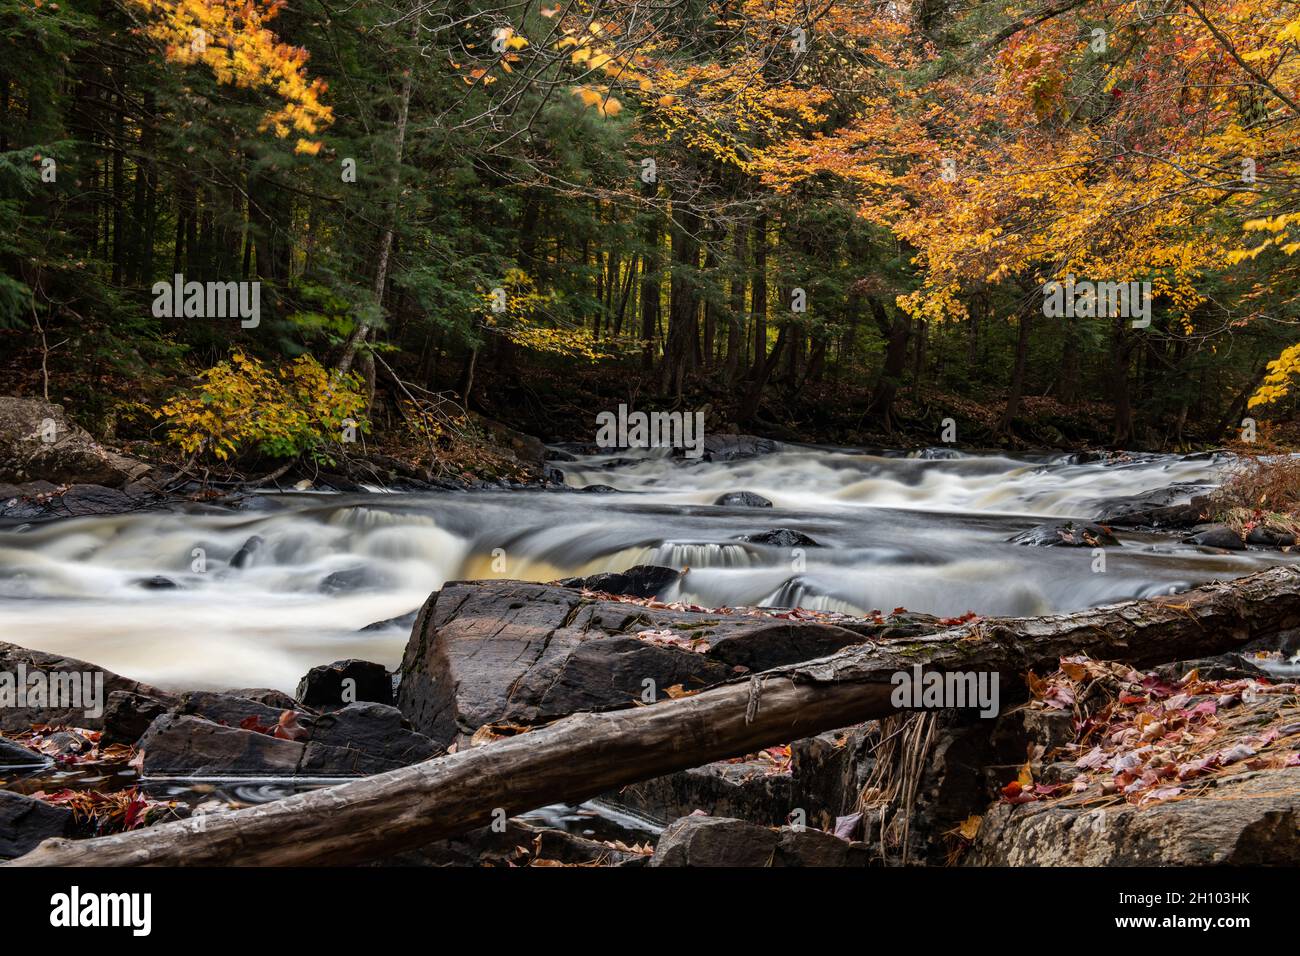 A long exposure image of falls on the Sacandaga River in the Adirondack Mountains, NY USA in autumn Stock Photo